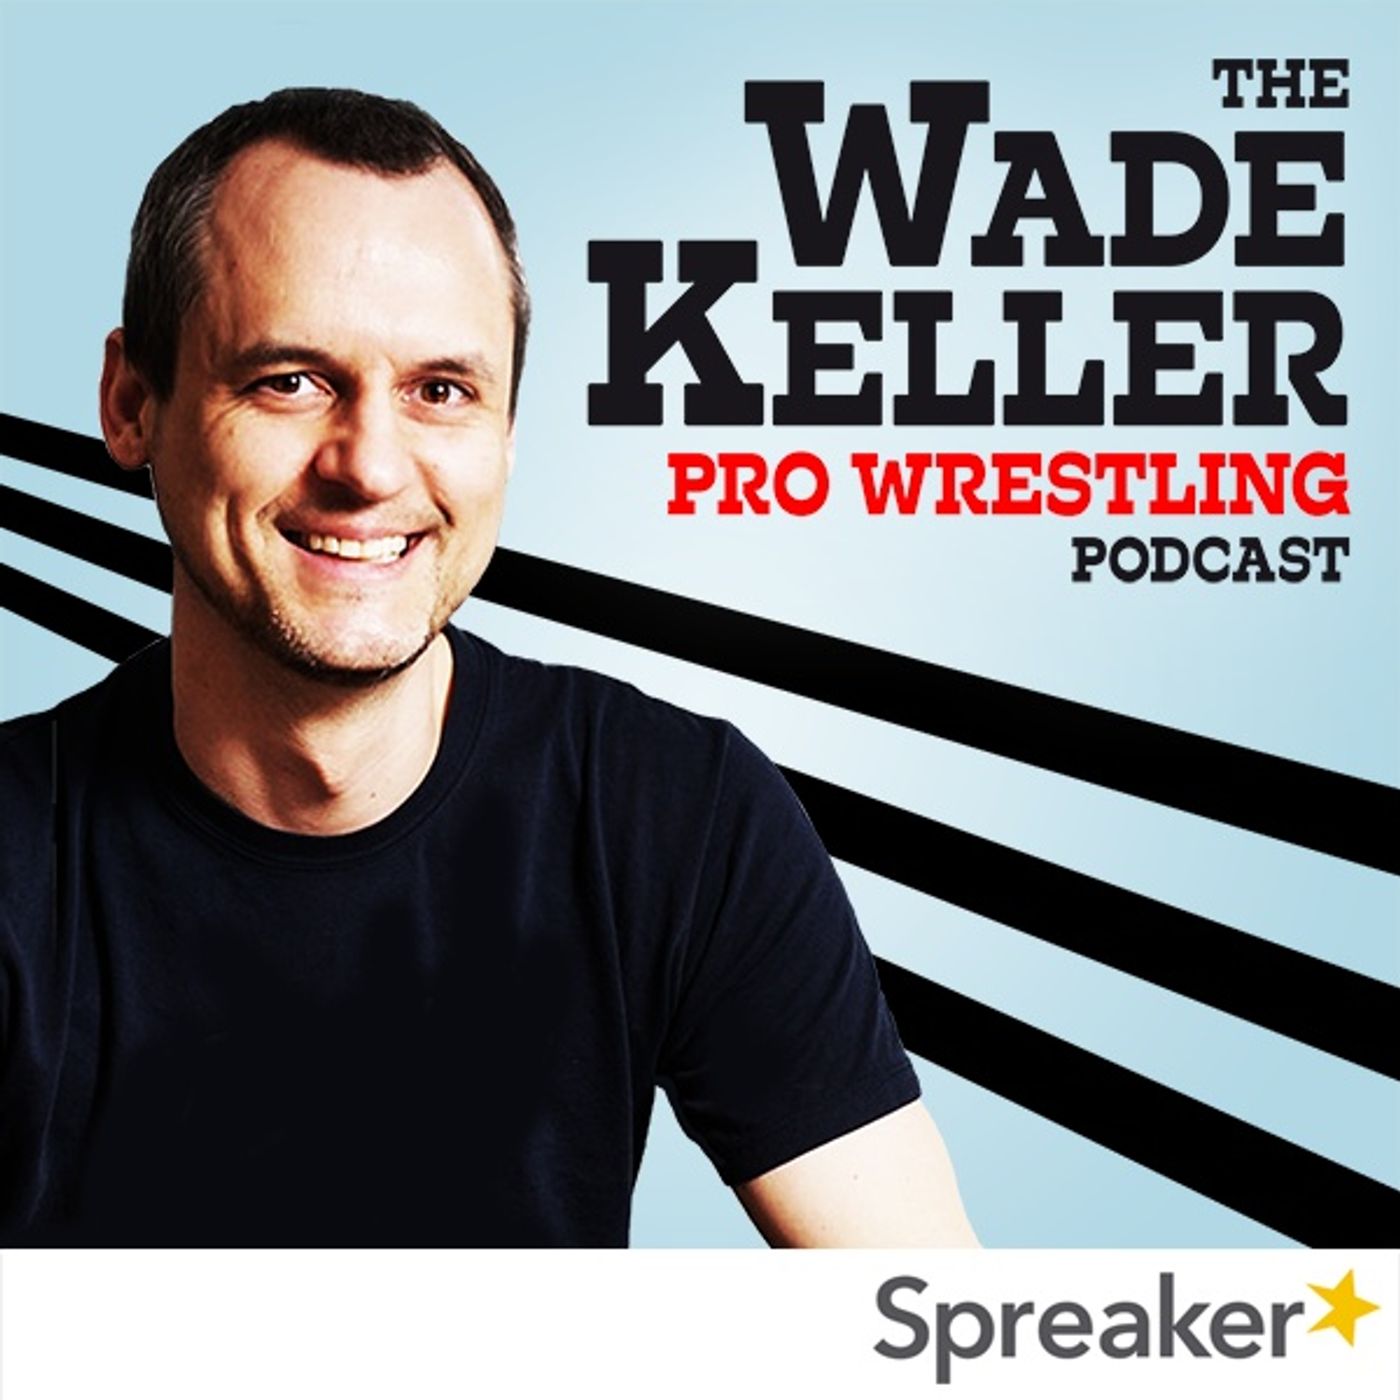 WKPWP - Interview - Ex-WWE Creative Matt McCarthy: Response to Moxley & Batista on writers, Vince & Triple H backstage stories (6-14-19)